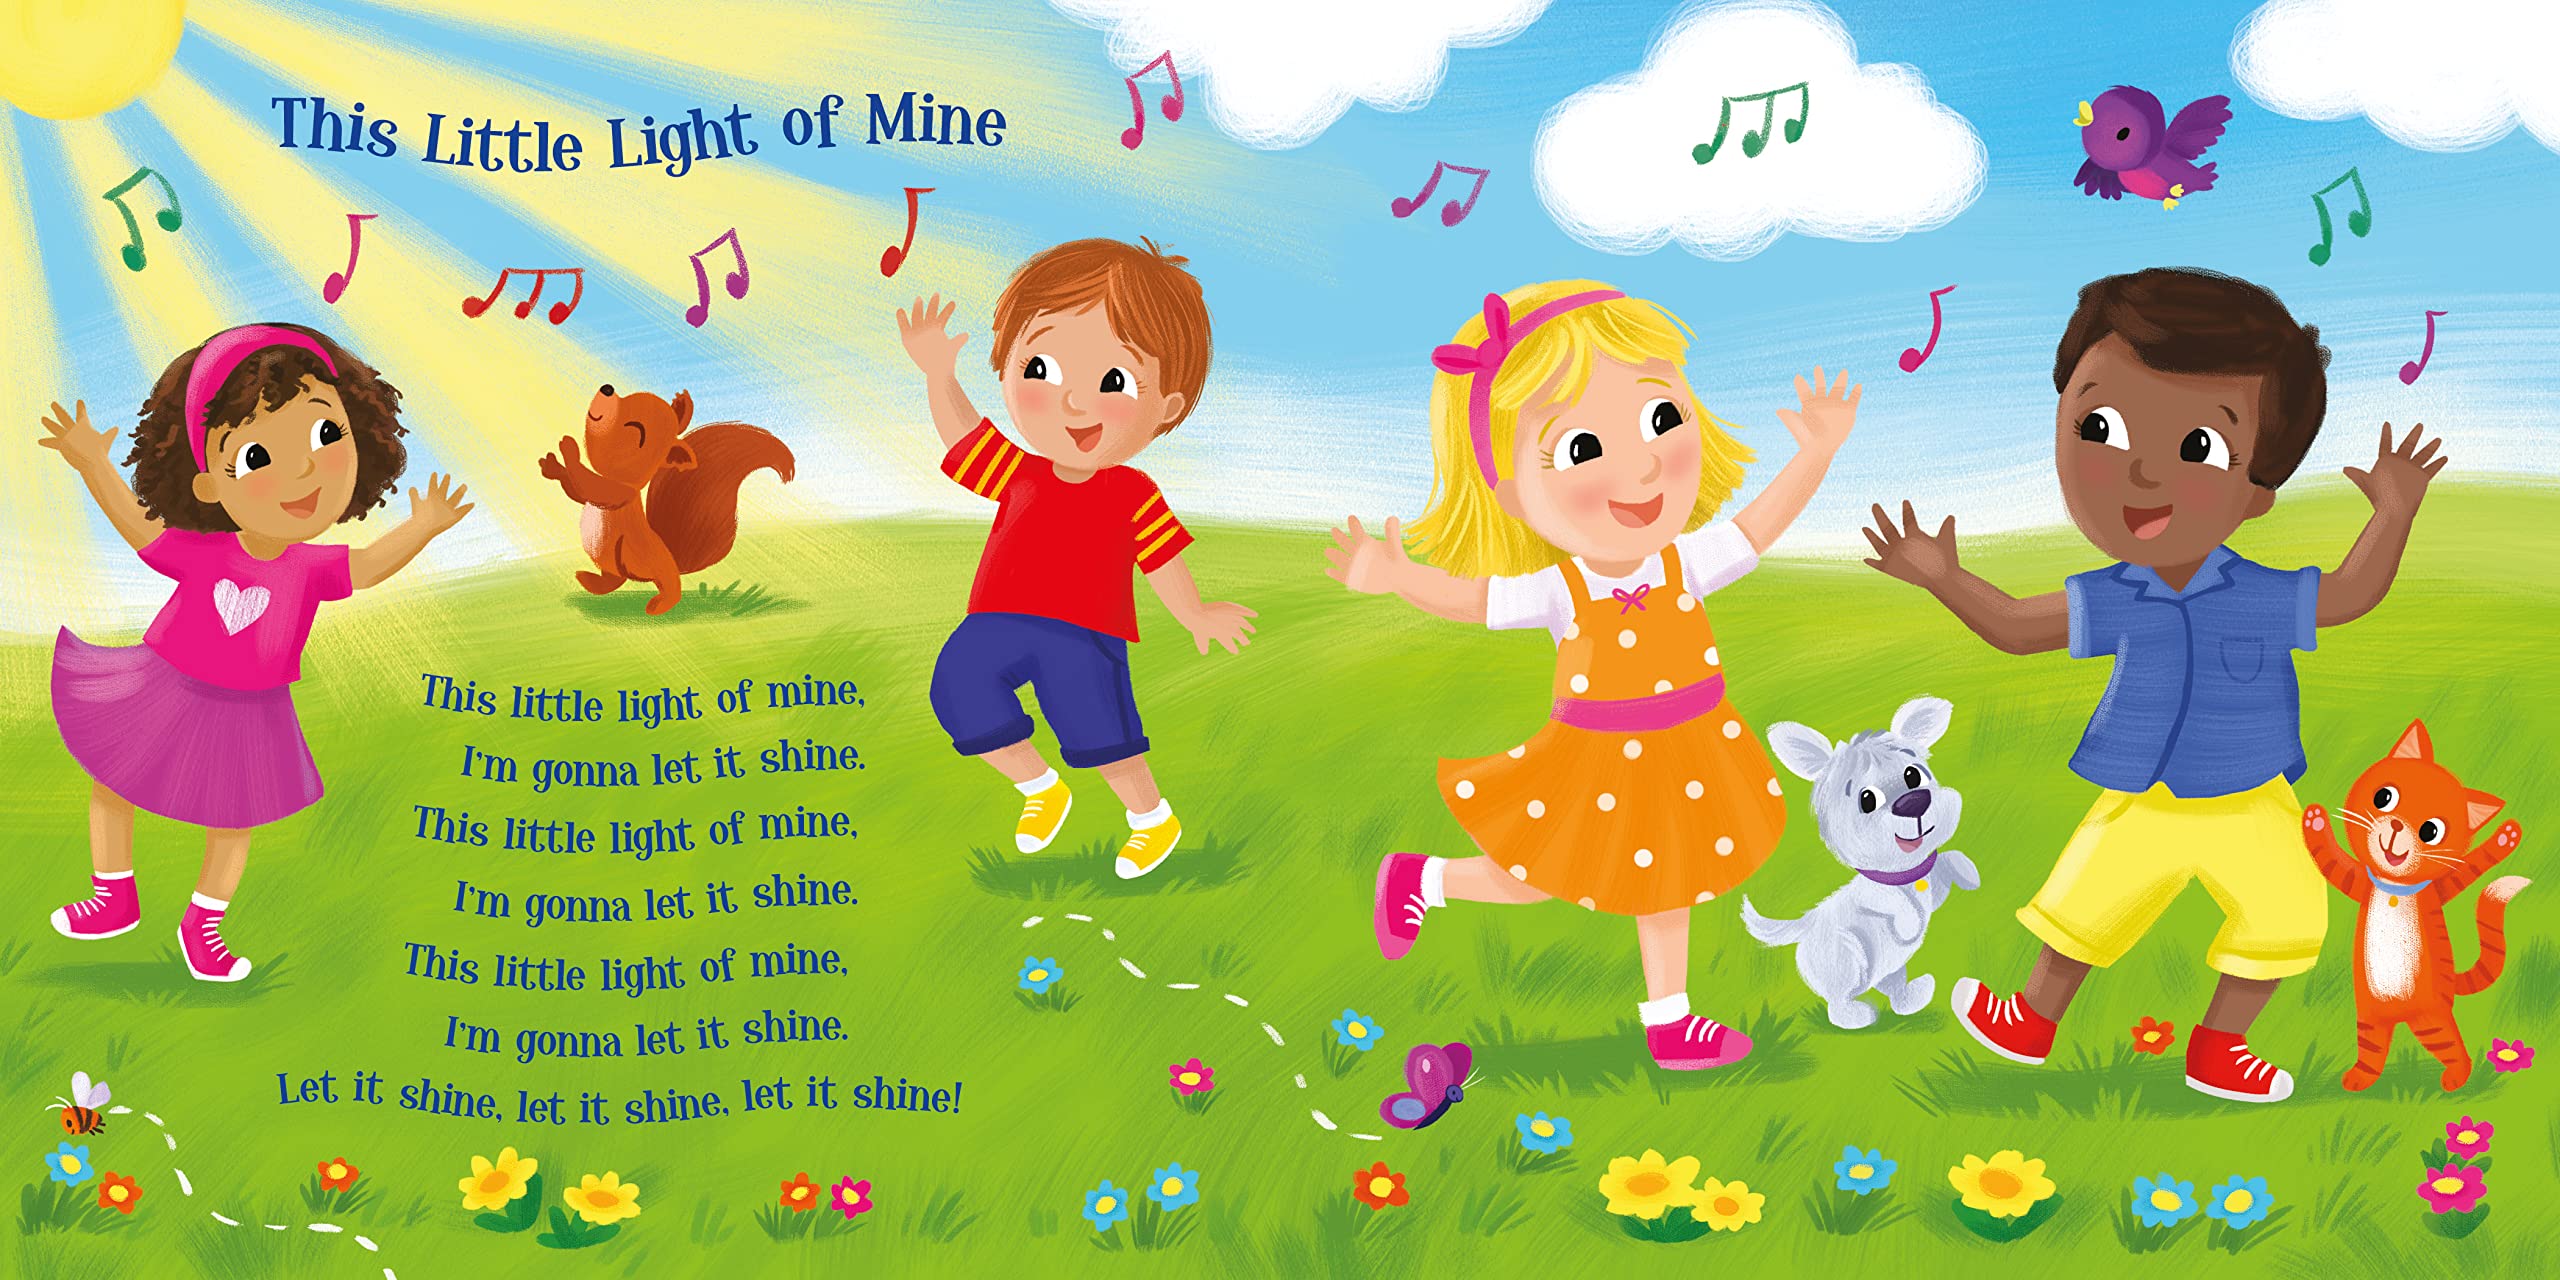 Jesus Loves Me and Other Bible Songs - Christian Children’s Books with 6 Sound Buttons for Toddlers